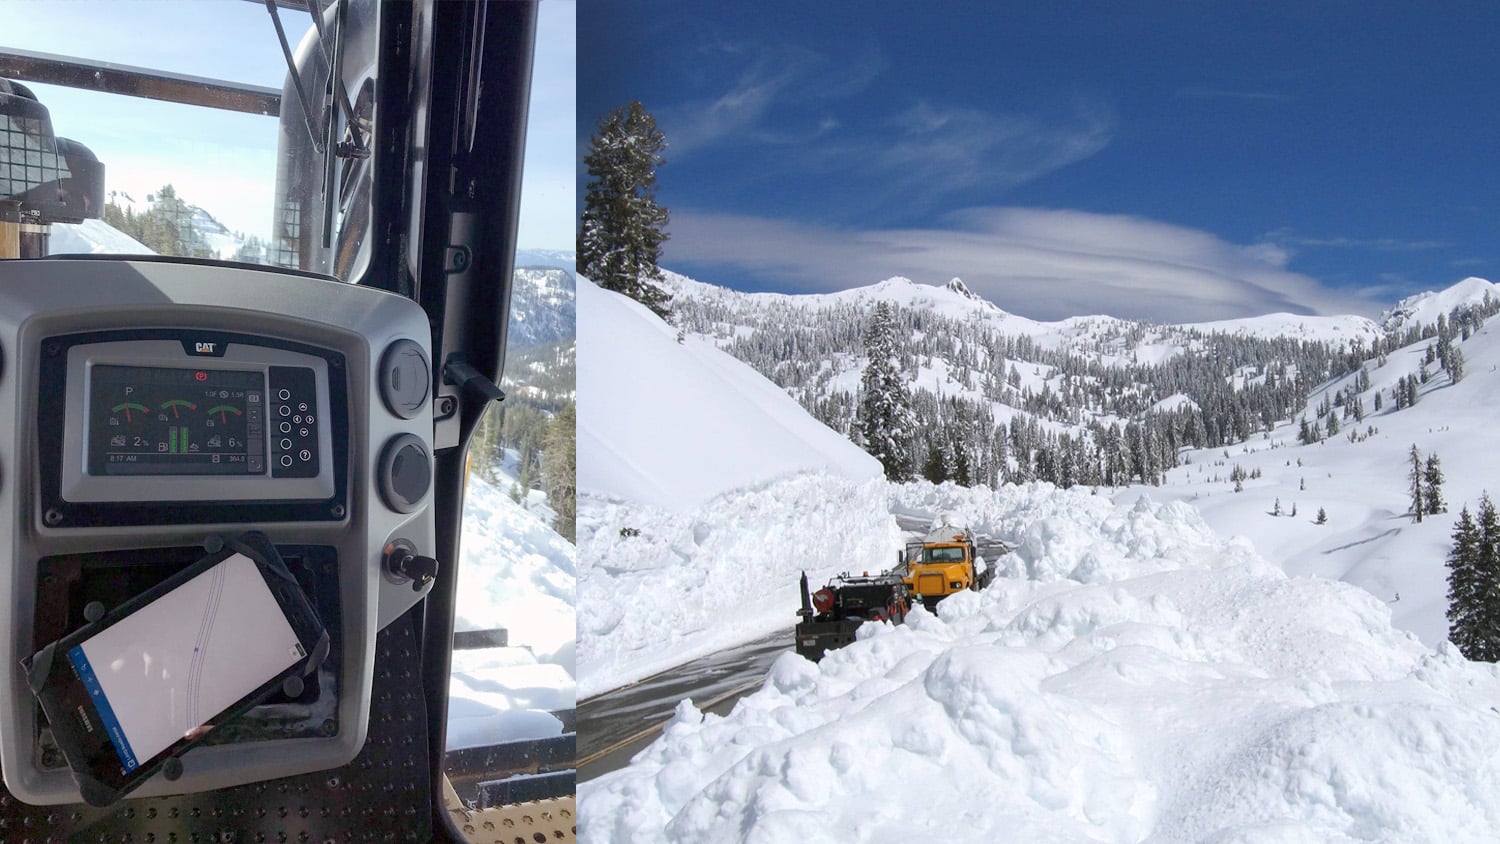 The National Park Service Uses Eos Arrow GNSS Data to Help Clear Snow from Unmarked Alpine Roads in LAVO National Park